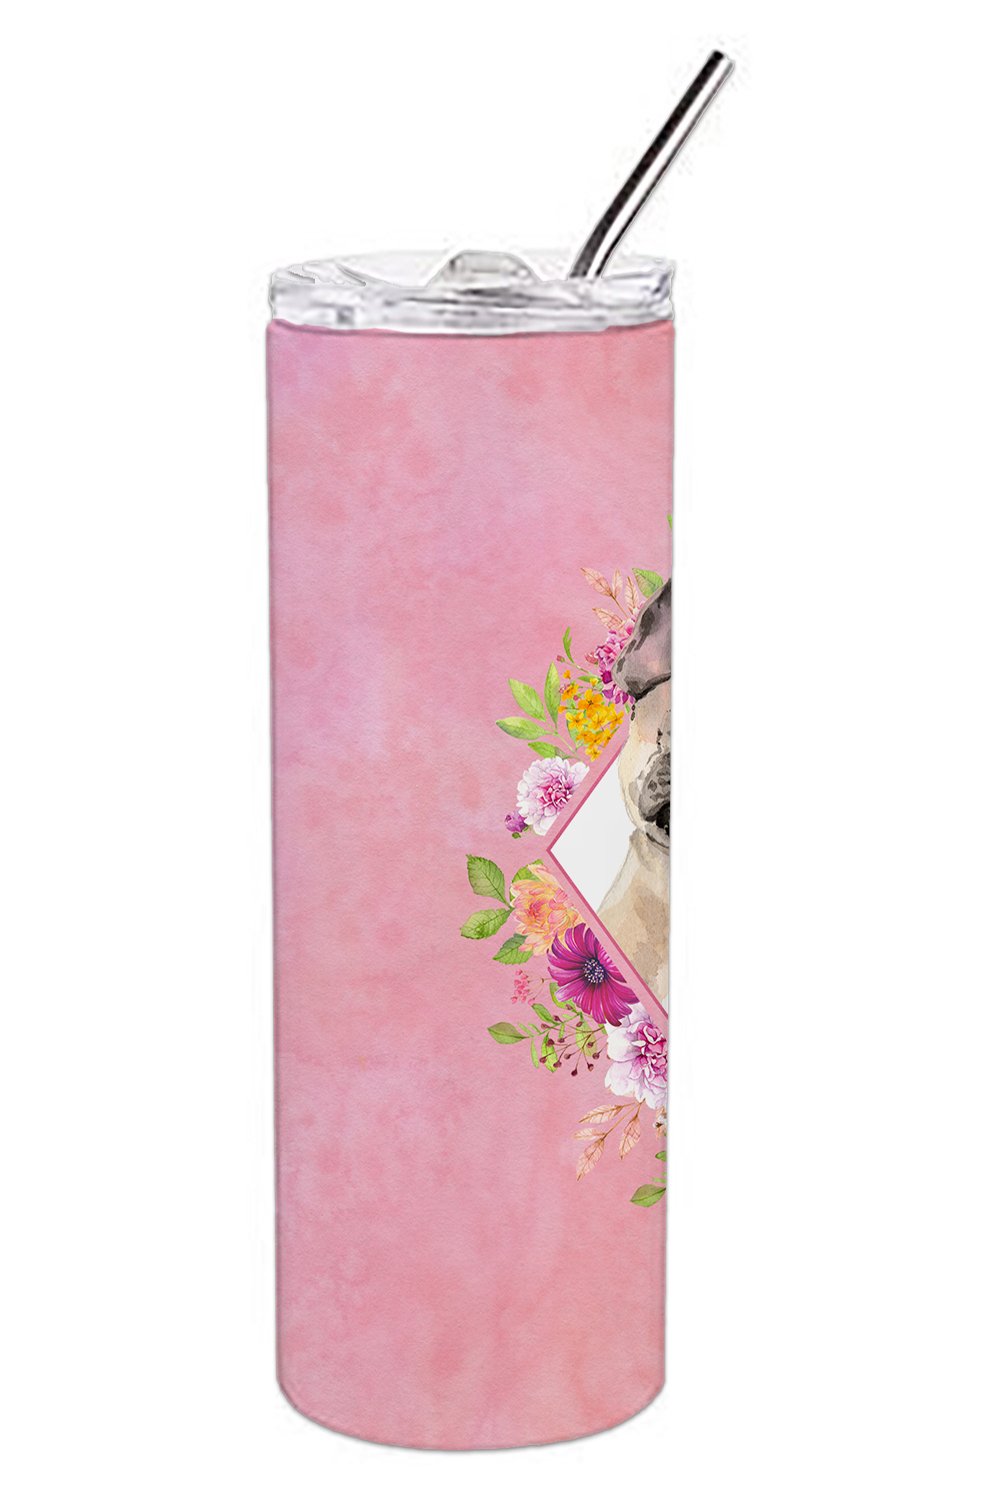 Fawn French Bulldog Pink Flowers Double Walled Stainless Steel 20 oz Skinny Tumbler CK4238TBL20 by Caroline's Treasures